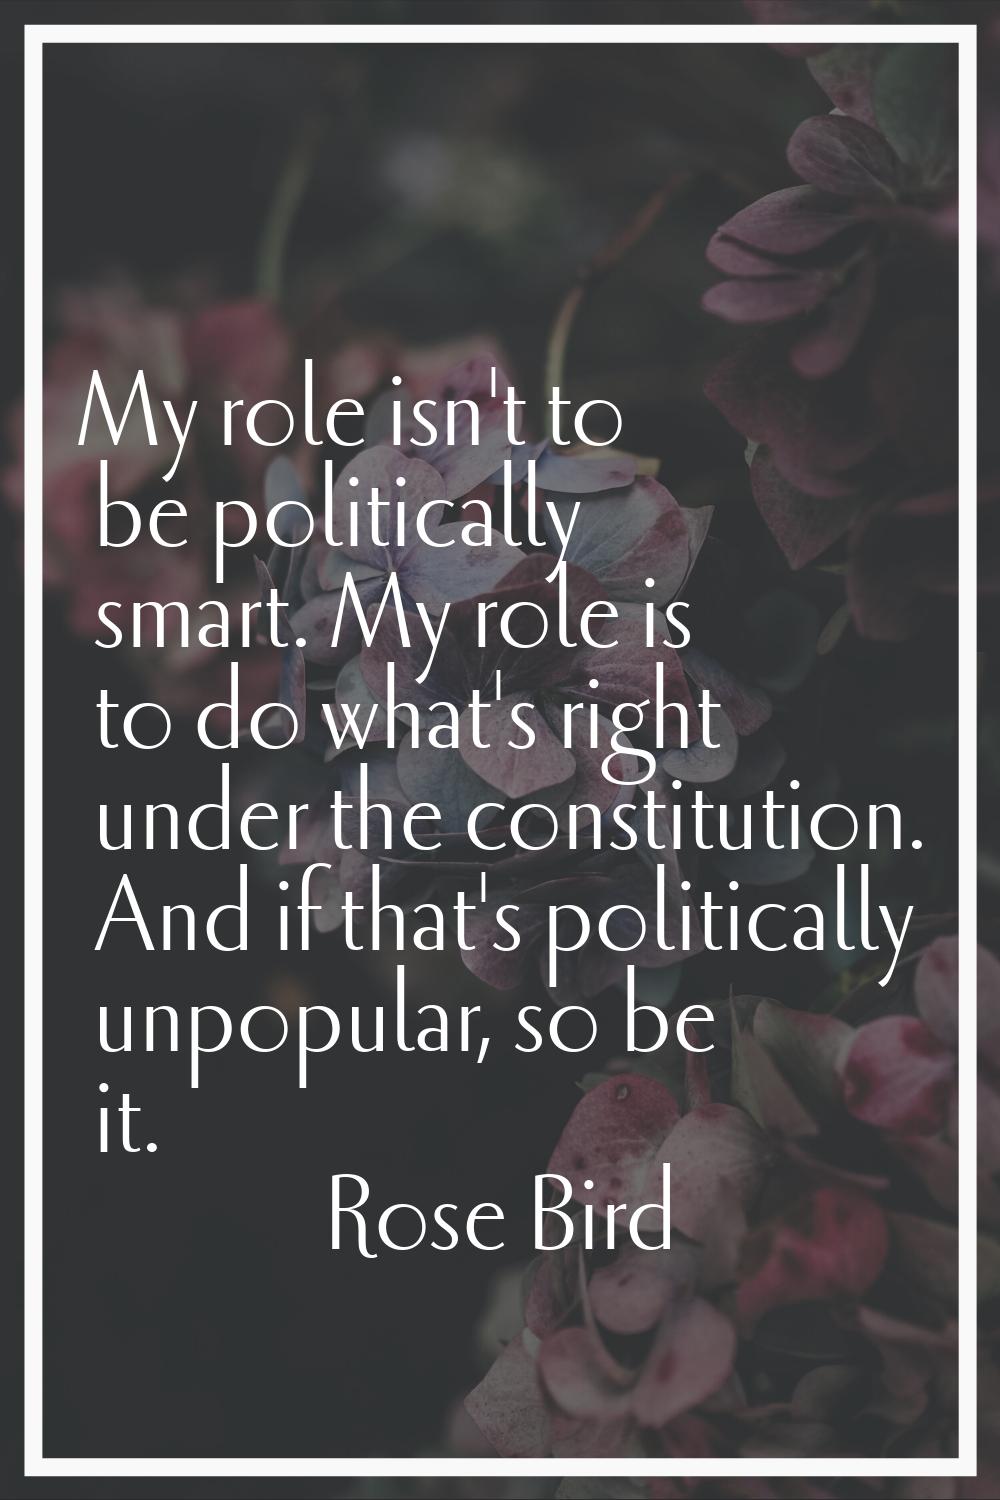 My role isn't to be politically smart. My role is to do what's right under the constitution. And if